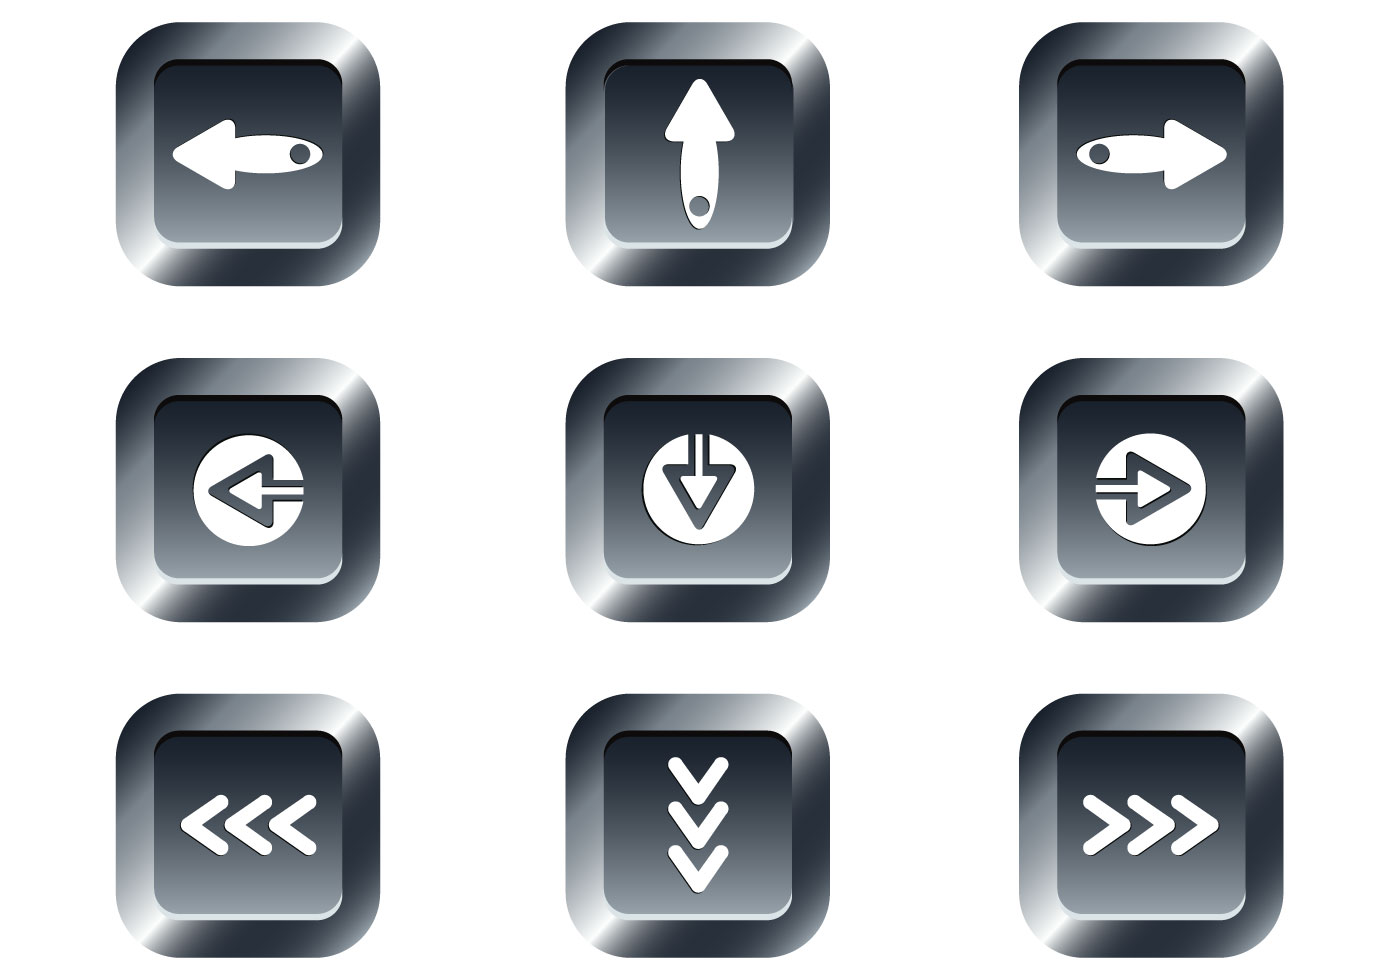 Free Web Buttons Set 15 Vector 111291 - Download Free ...